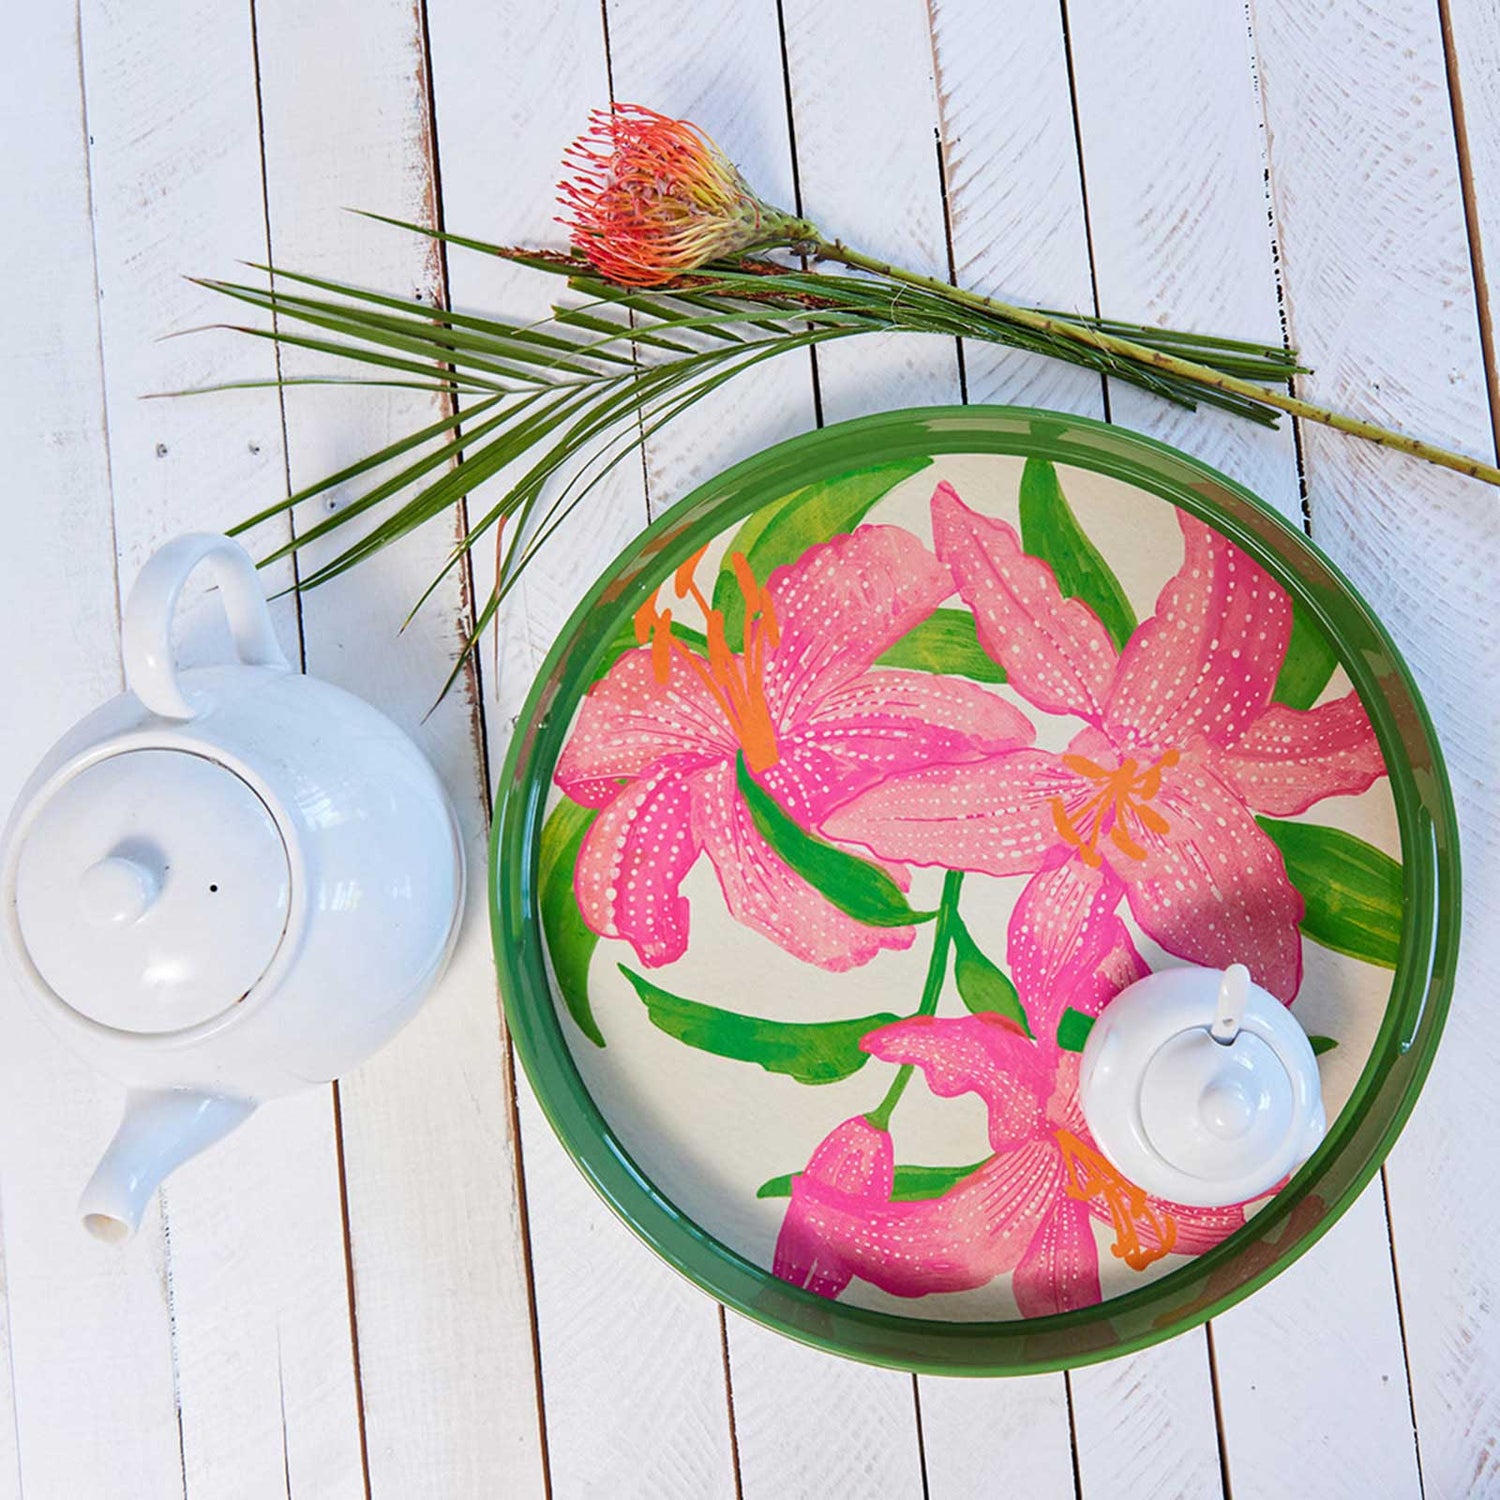 Tiger Lilies 15 Inch Round Tray Tray - rockflowerpaper